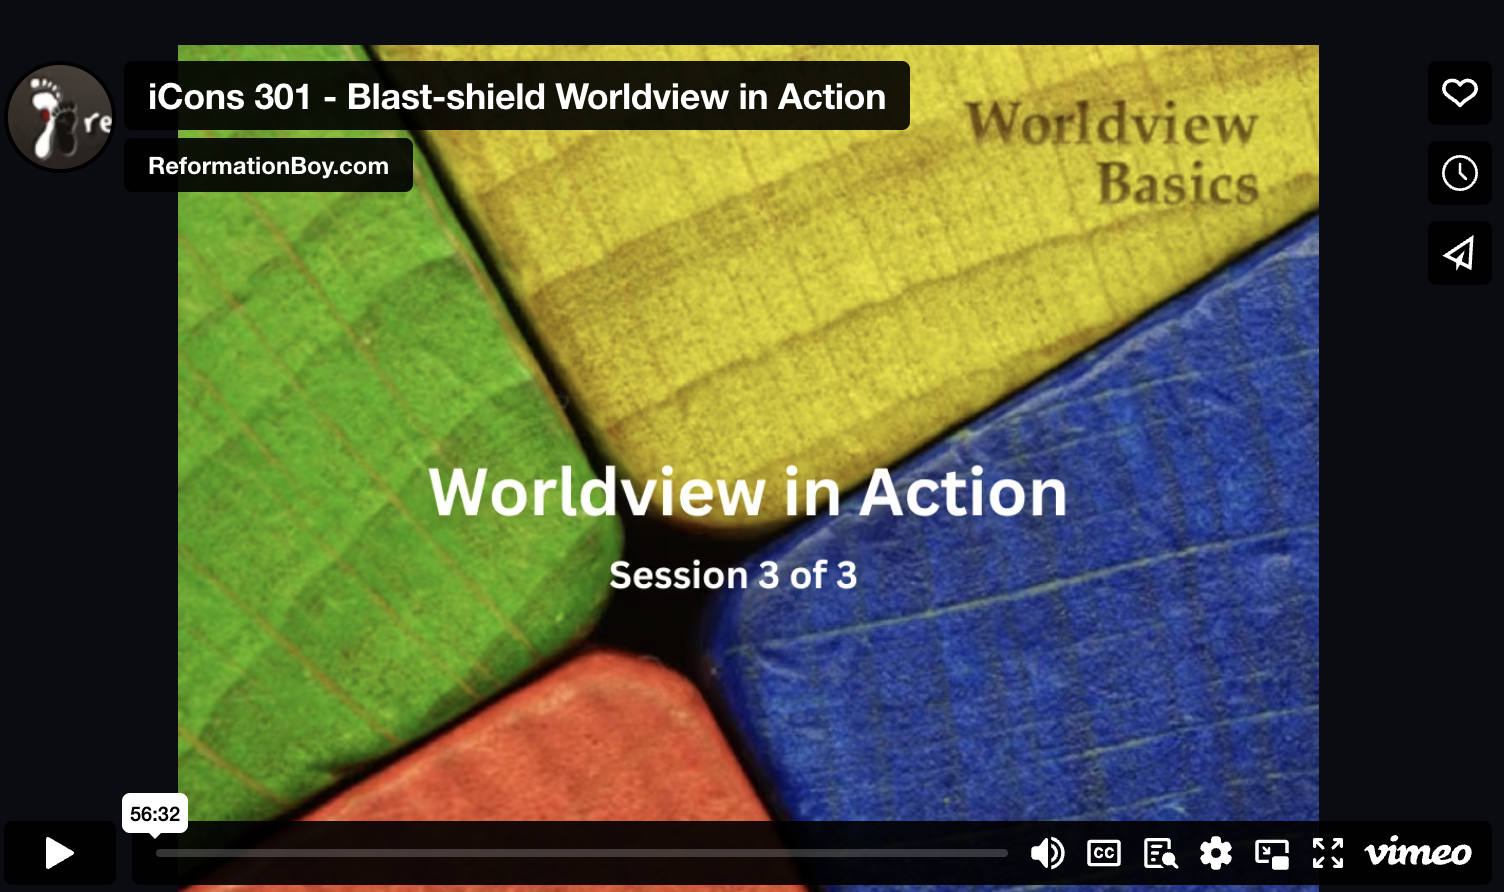 iCons 301: Blast-shield worldview in action